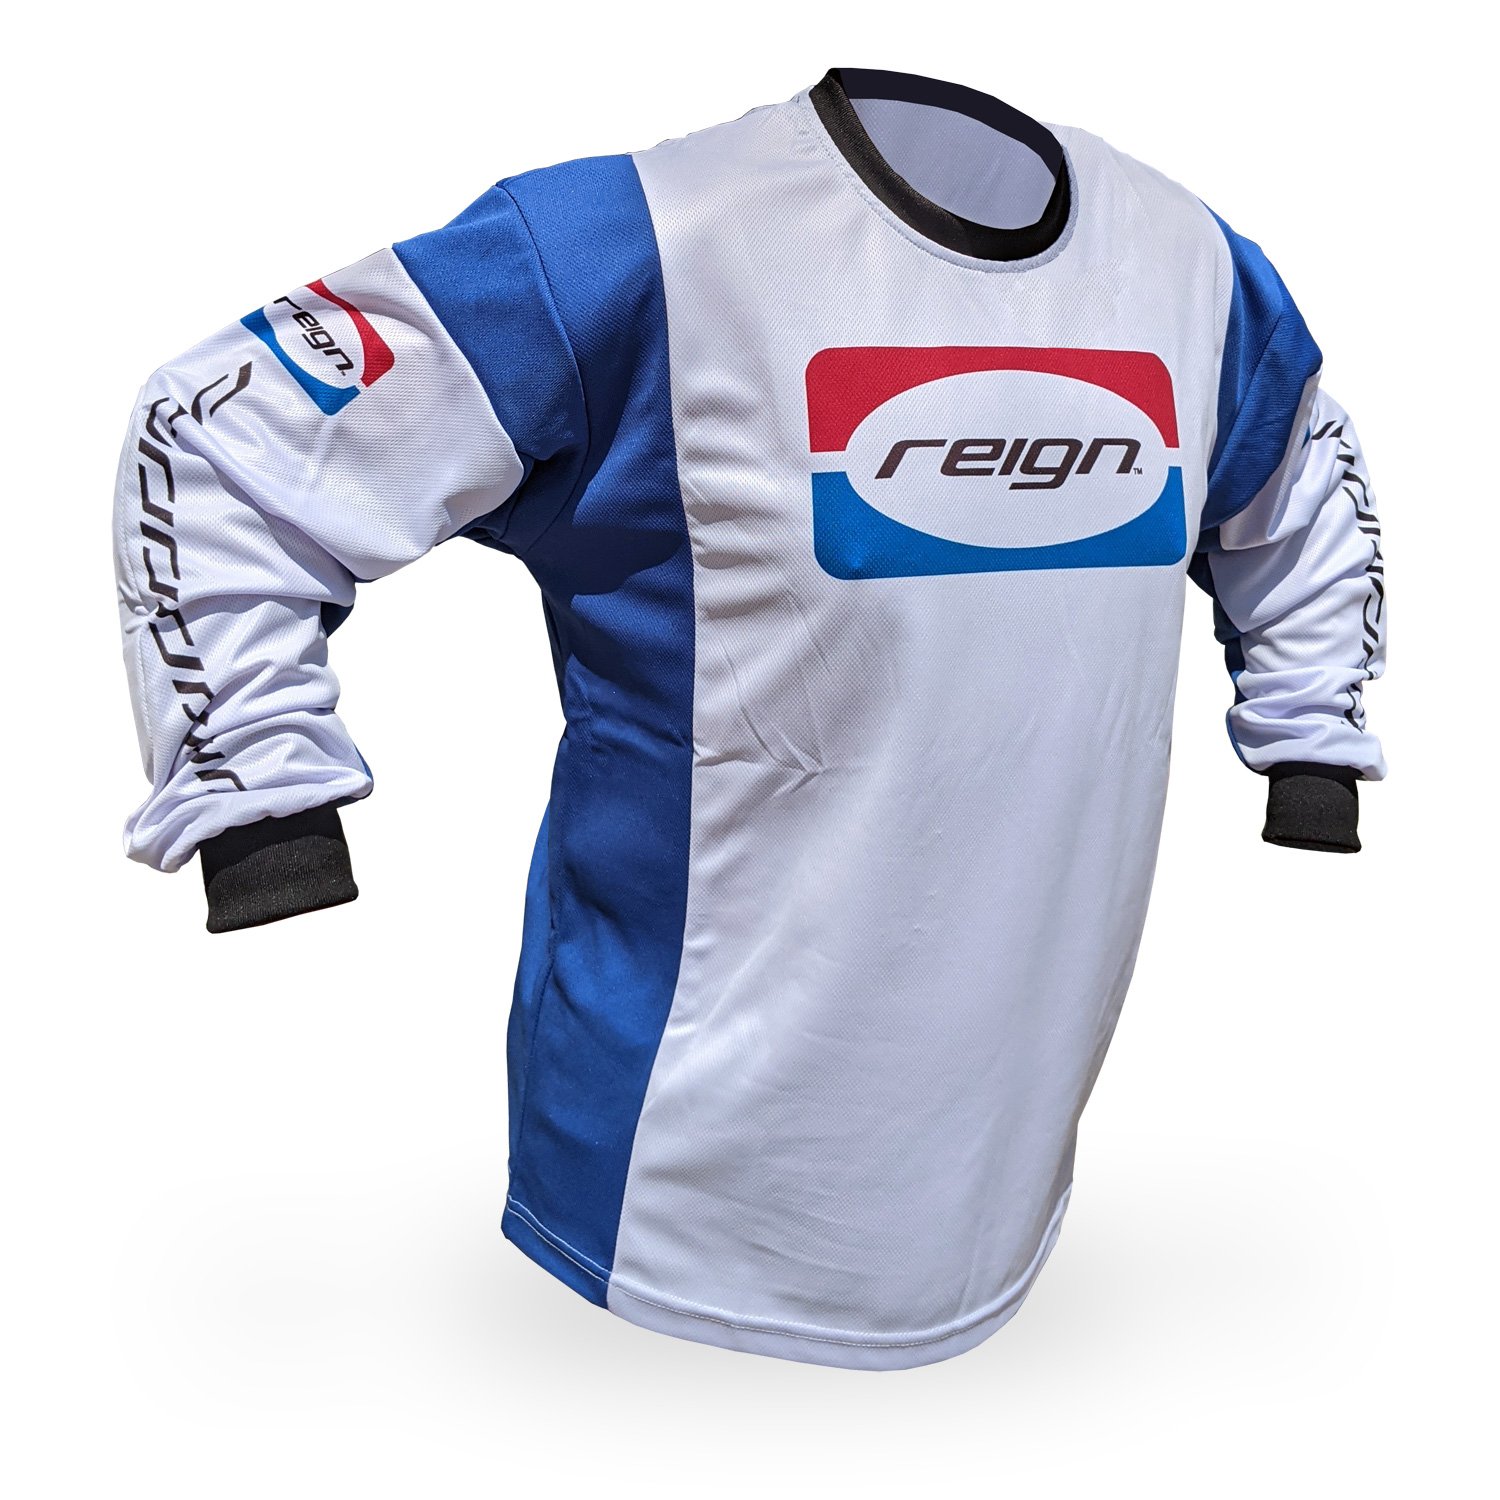 Reign VMX Cycle Products West Vintage Style Motocross Jersey 